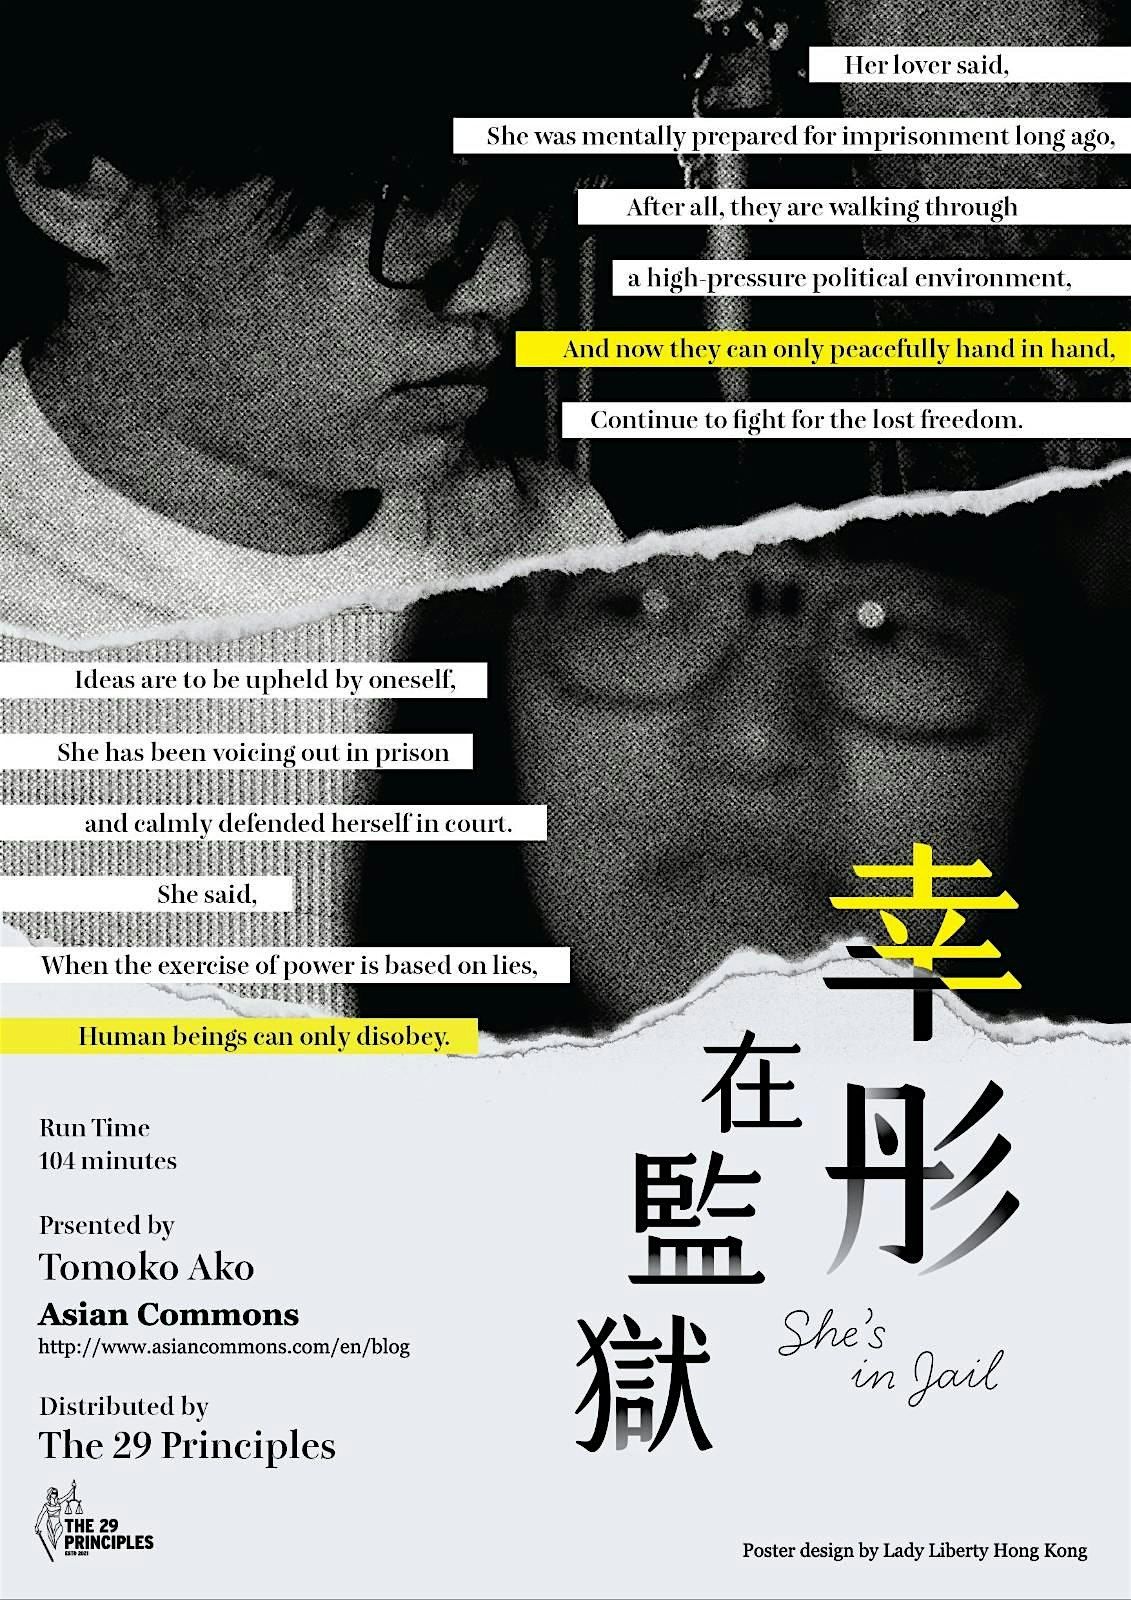 Film Screening: "She's In J*il", about Hong Kong activist Chow Hang Tung